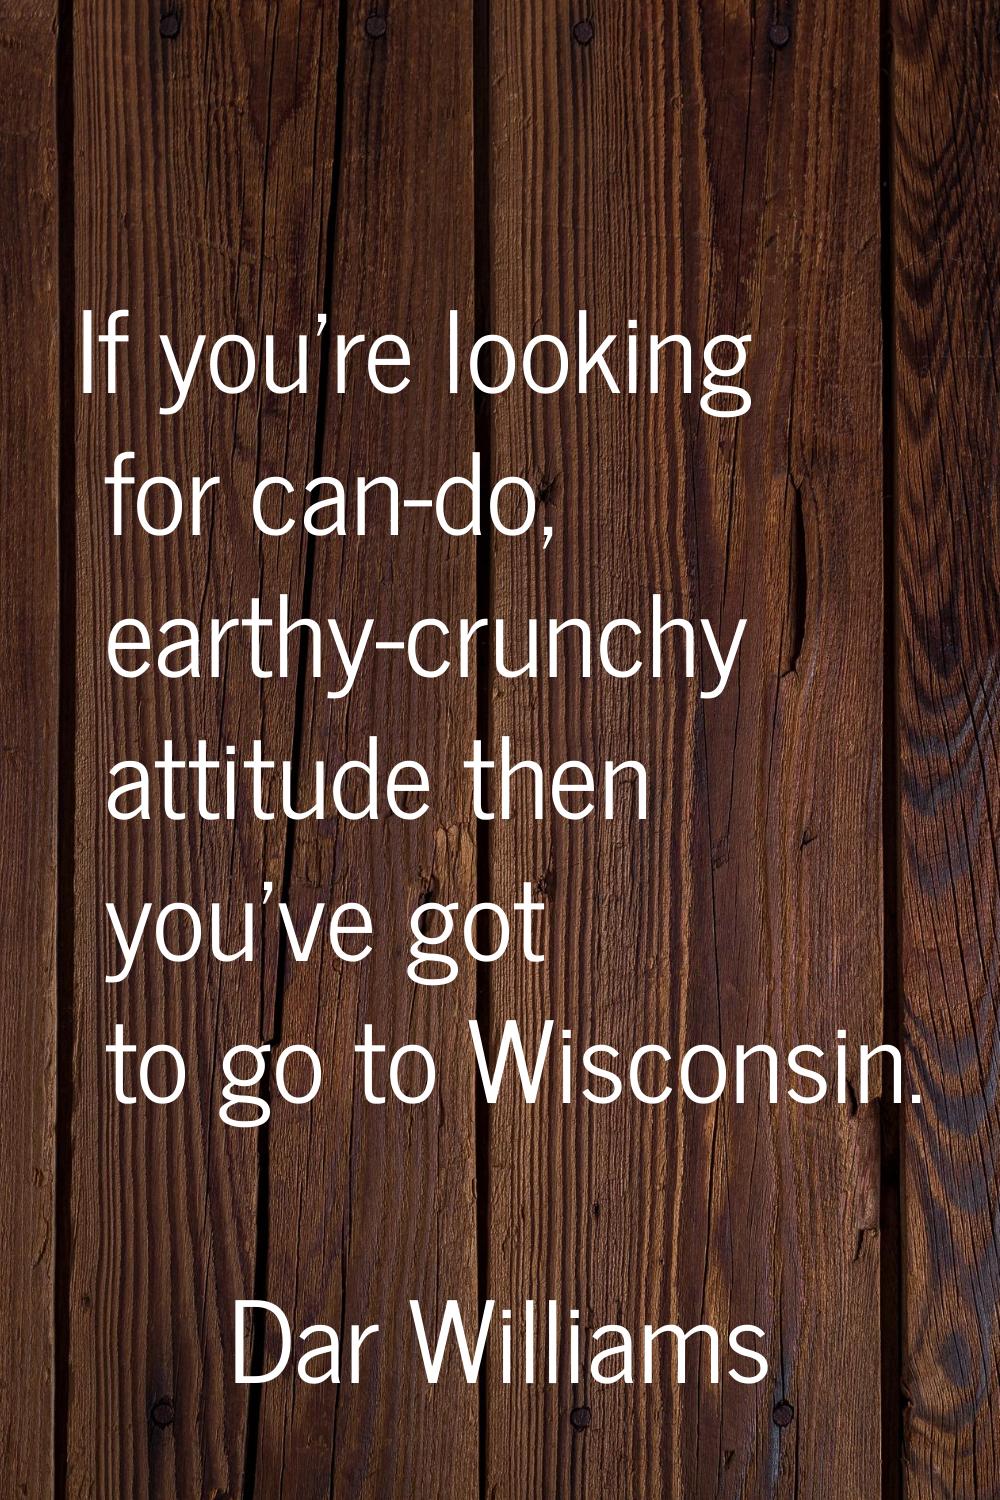 If you're looking for can-do, earthy-crunchy attitude then you've got to go to Wisconsin.